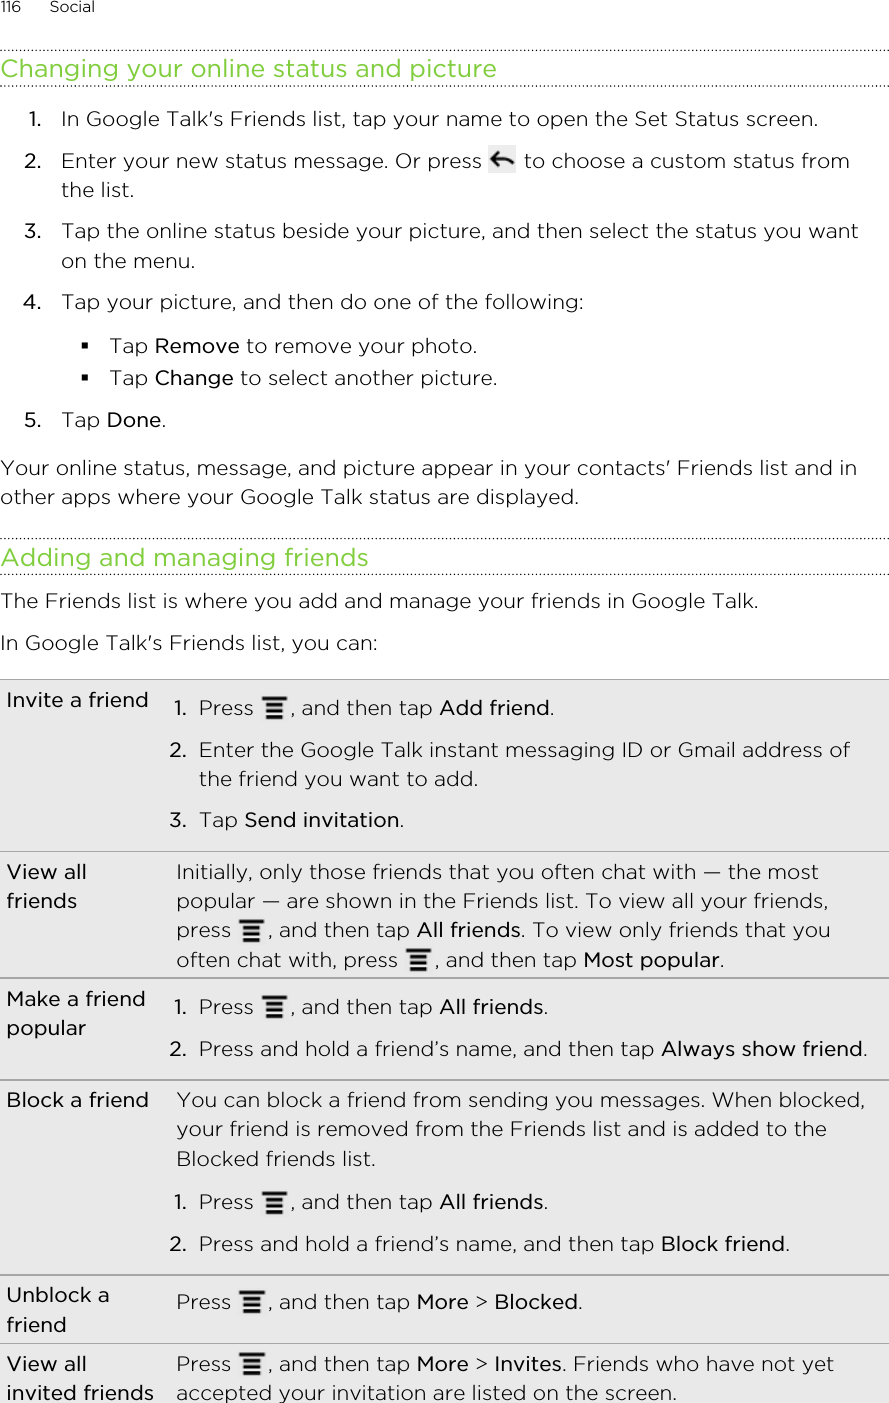 Changing your online status and picture1. In Google Talk&apos;s Friends list, tap your name to open the Set Status screen.2. Enter your new status message. Or press   to choose a custom status fromthe list.3. Tap the online status beside your picture, and then select the status you wanton the menu.4. Tap your picture, and then do one of the following:§Tap Remove to remove your photo.§Tap Change to select another picture.5. Tap Done.Your online status, message, and picture appear in your contacts&apos; Friends list and inother apps where your Google Talk status are displayed.Adding and managing friendsThe Friends list is where you add and manage your friends in Google Talk.In Google Talk&apos;s Friends list, you can:Invite a friend 1. Press  , and then tap Add friend.2. Enter the Google Talk instant messaging ID or Gmail address ofthe friend you want to add.3. Tap Send invitation.View allfriendsInitially, only those friends that you often chat with — the mostpopular — are shown in the Friends list. To view all your friends,press  , and then tap All friends. To view only friends that youoften chat with, press  , and then tap Most popular.Make a friendpopular 1. Press  , and then tap All friends.2. Press and hold a friend’s name, and then tap Always show friend.Block a friend You can block a friend from sending you messages. When blocked,your friend is removed from the Friends list and is added to theBlocked friends list.1. Press  , and then tap All friends.2. Press and hold a friend’s name, and then tap Block friend.Unblock afriend Press  , and then tap More &gt; Blocked.View allinvited friendsPress  , and then tap More &gt; Invites. Friends who have not yetaccepted your invitation are listed on the screen.116 Social